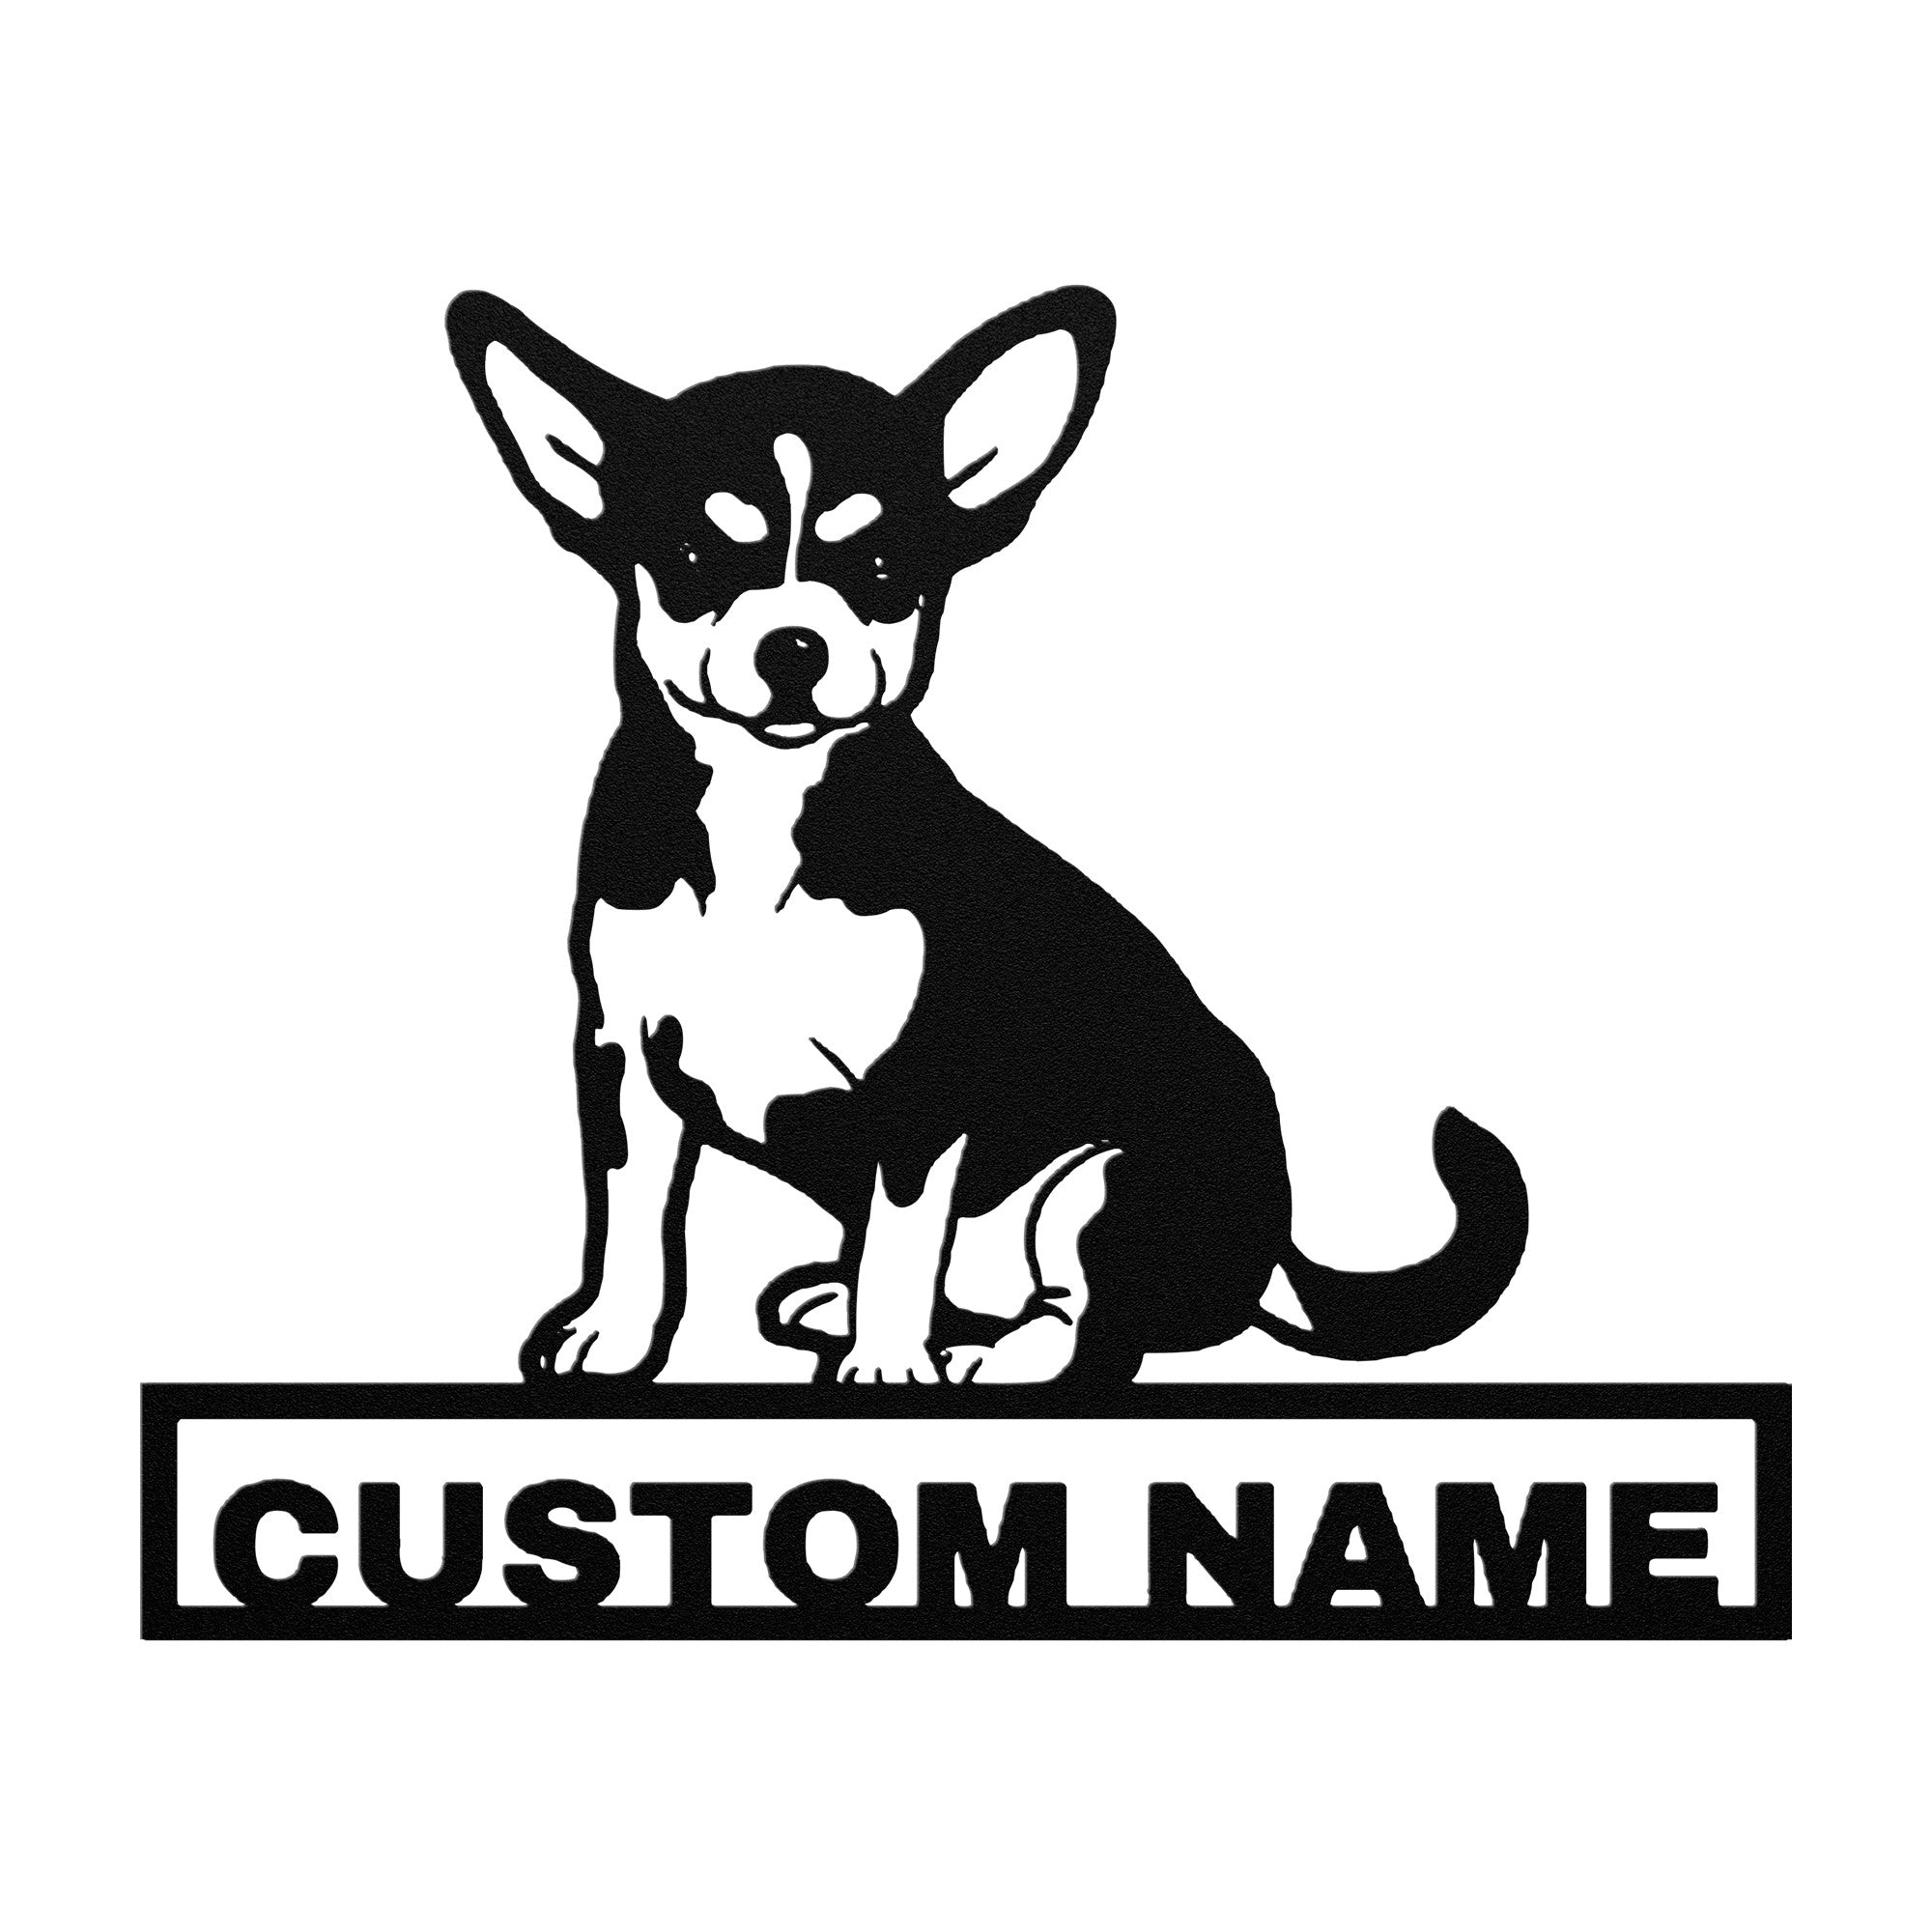 Personalized Chihuahua Dog Metal Sign - Chihuahua Custom Name Wall Decor, Metal Signs Customized Outdoor Indoor, Wall Art Gift For Chihuahua Dog Lover